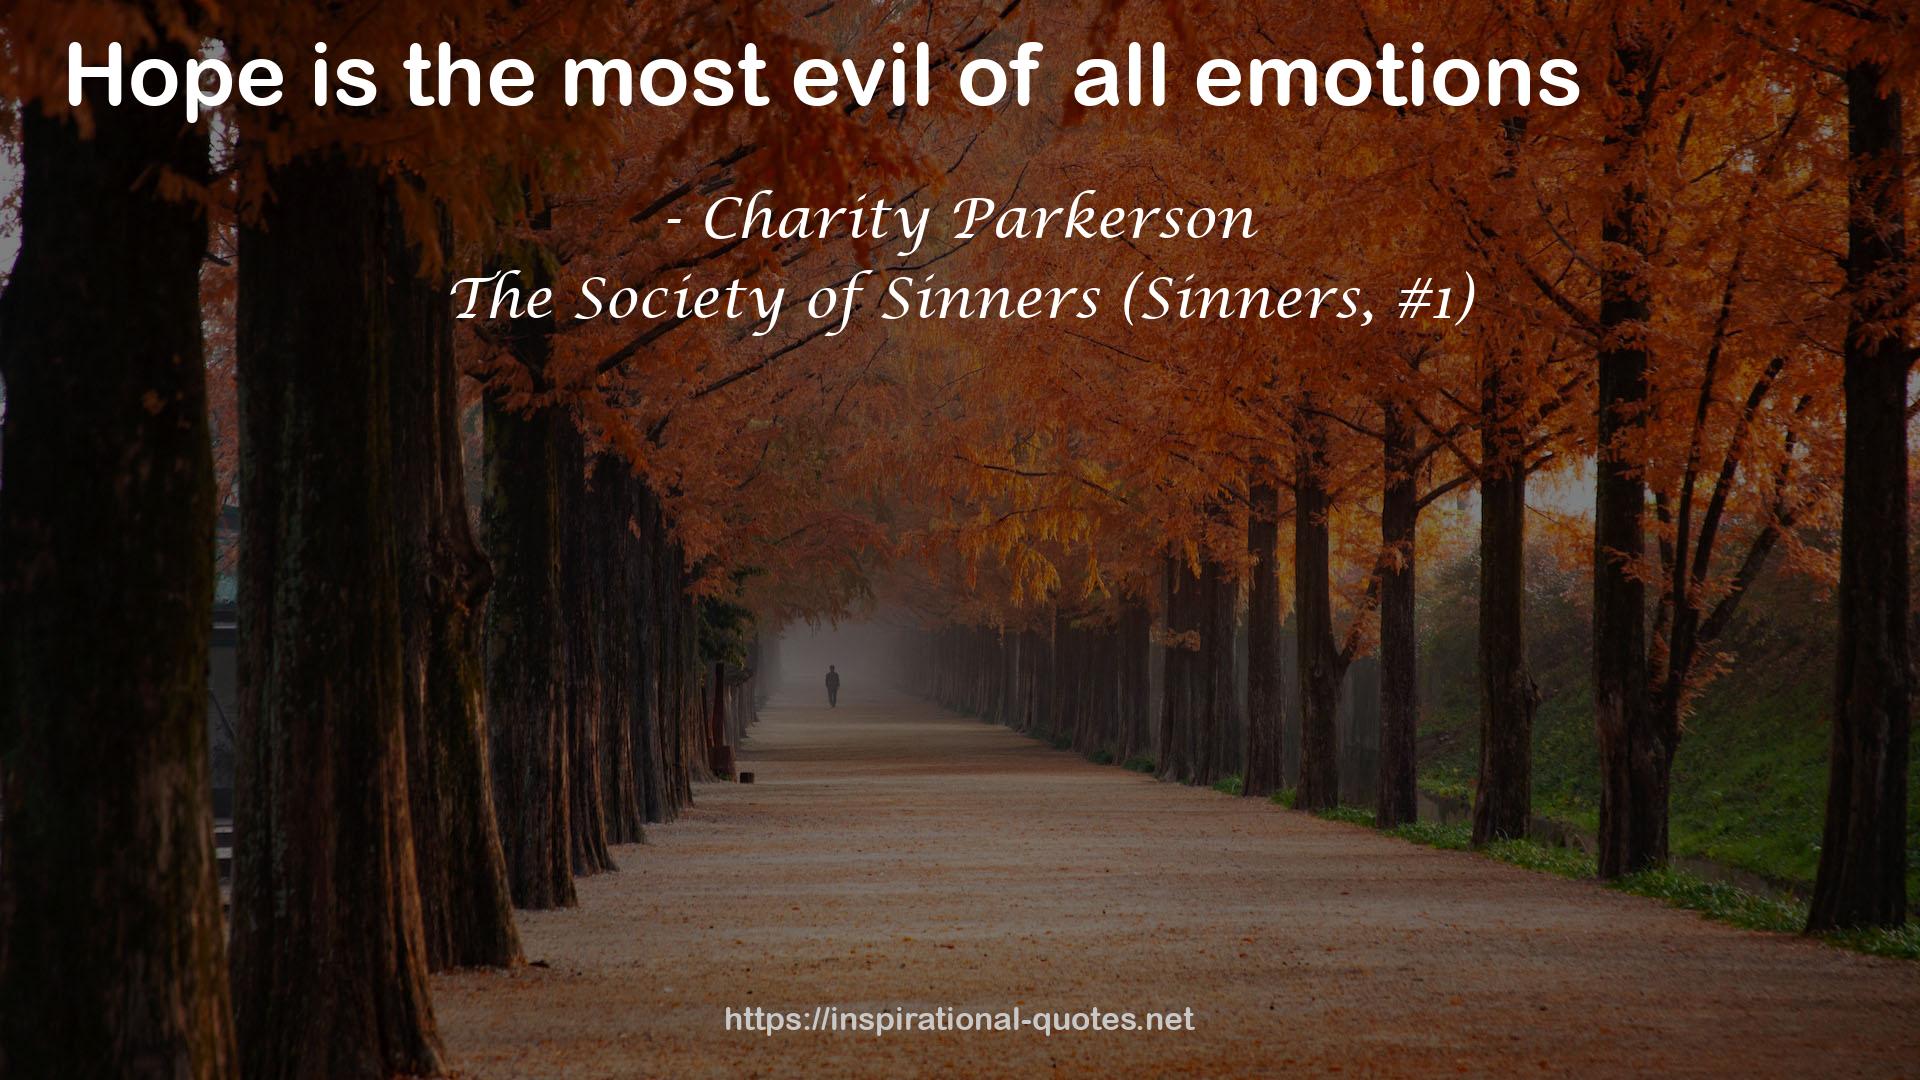 The Society of Sinners (Sinners, #1) QUOTES